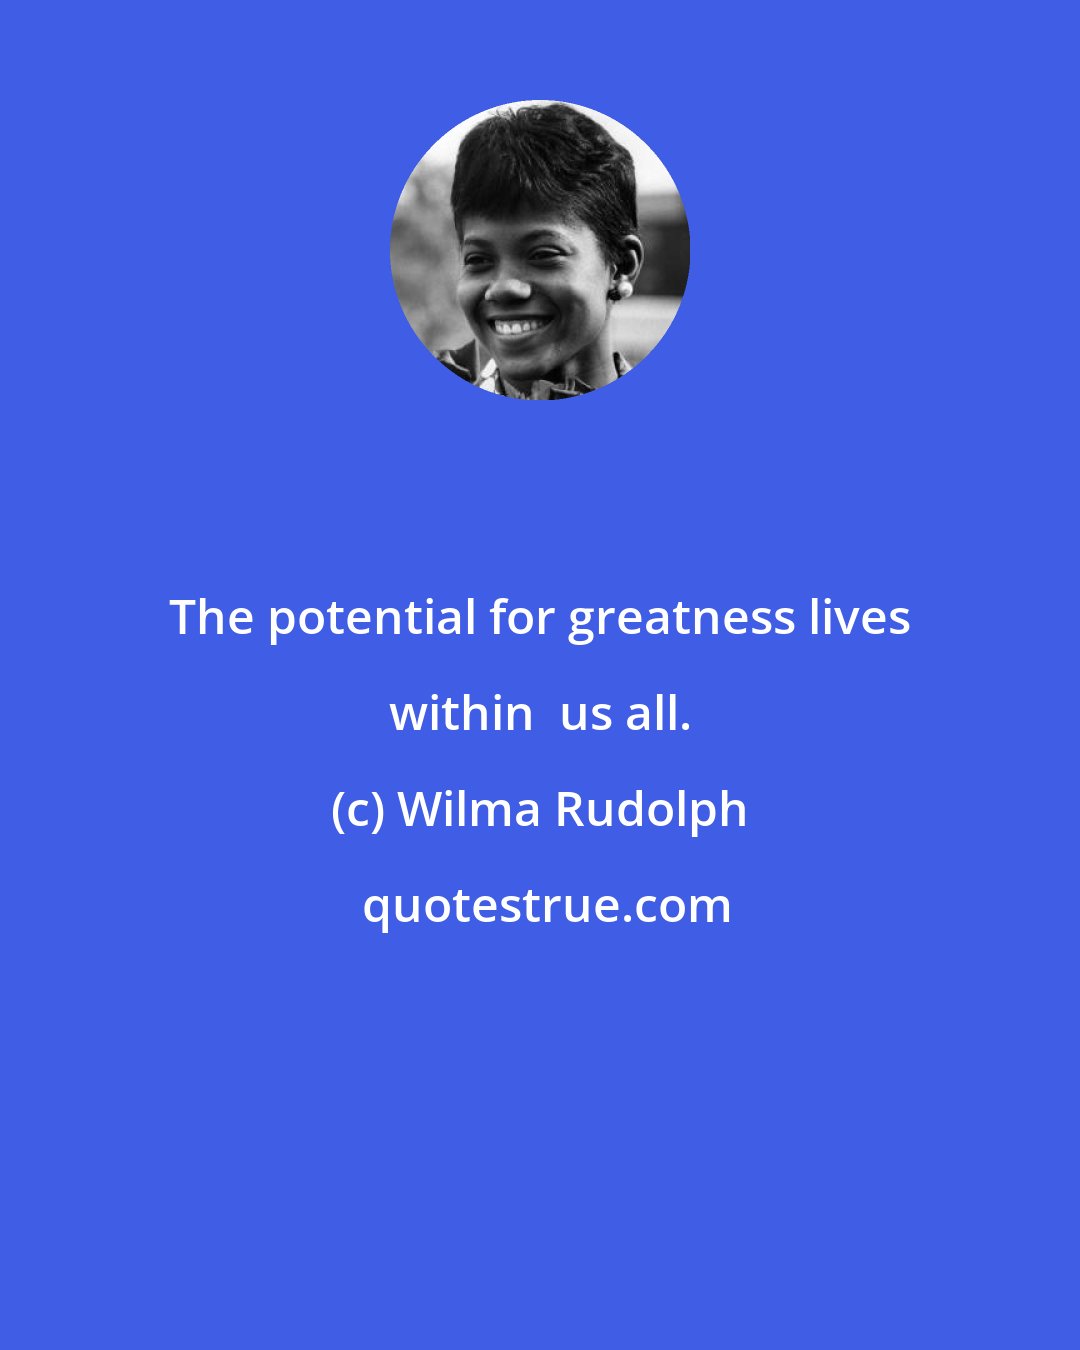 Wilma Rudolph: The potential for greatness lives within  us all.